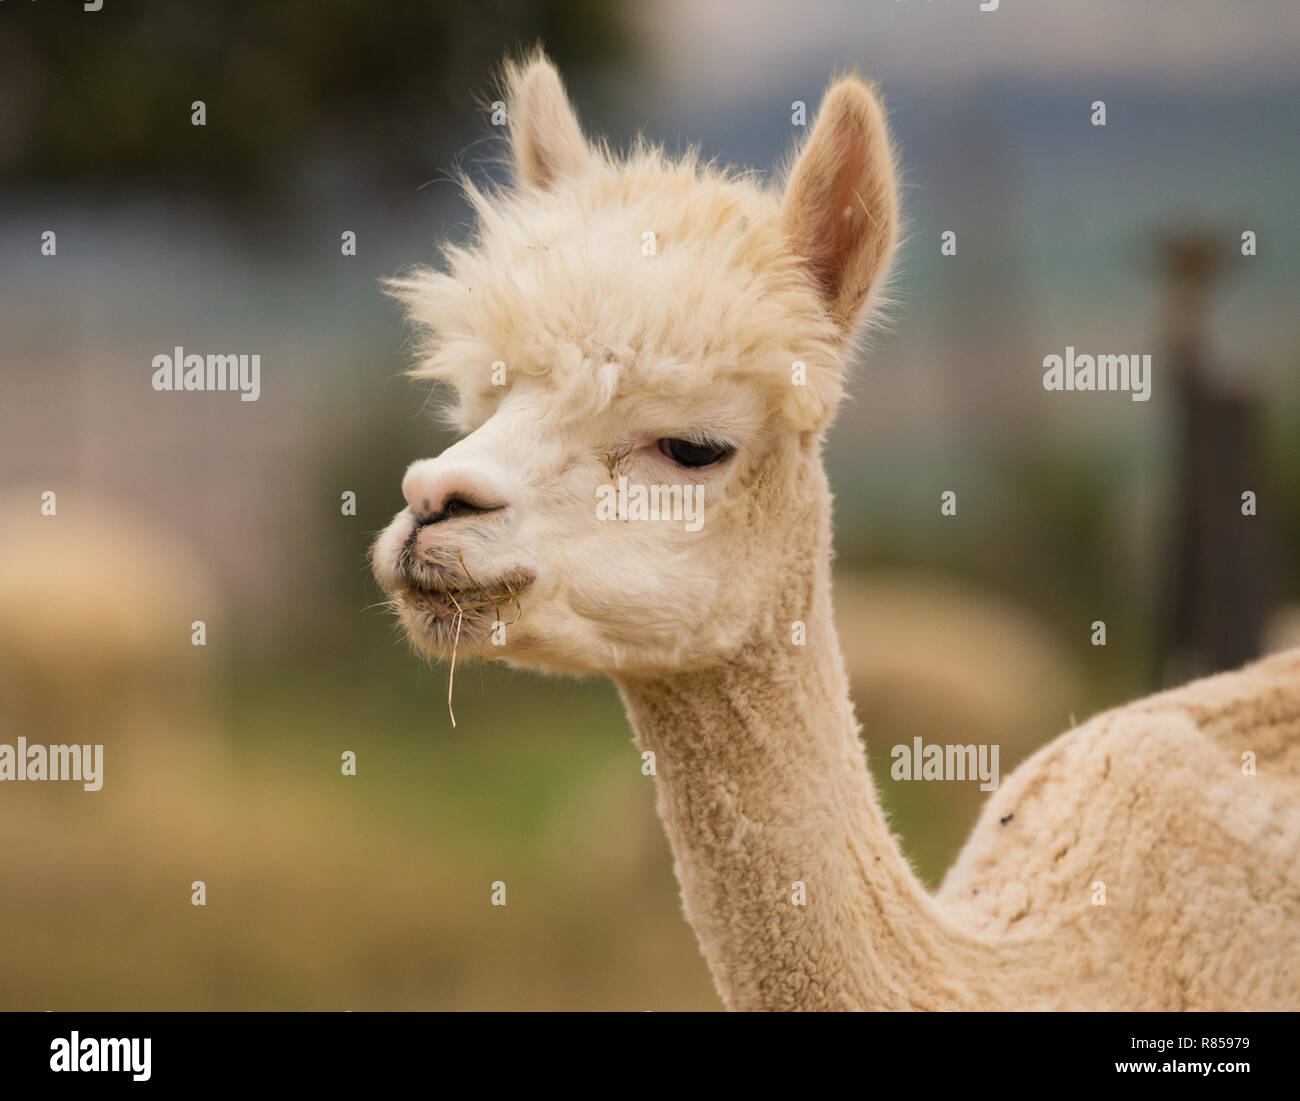 Alpaca animal with food in its mouth and its head up on a farm in Paarl, South Africa Stock Photo